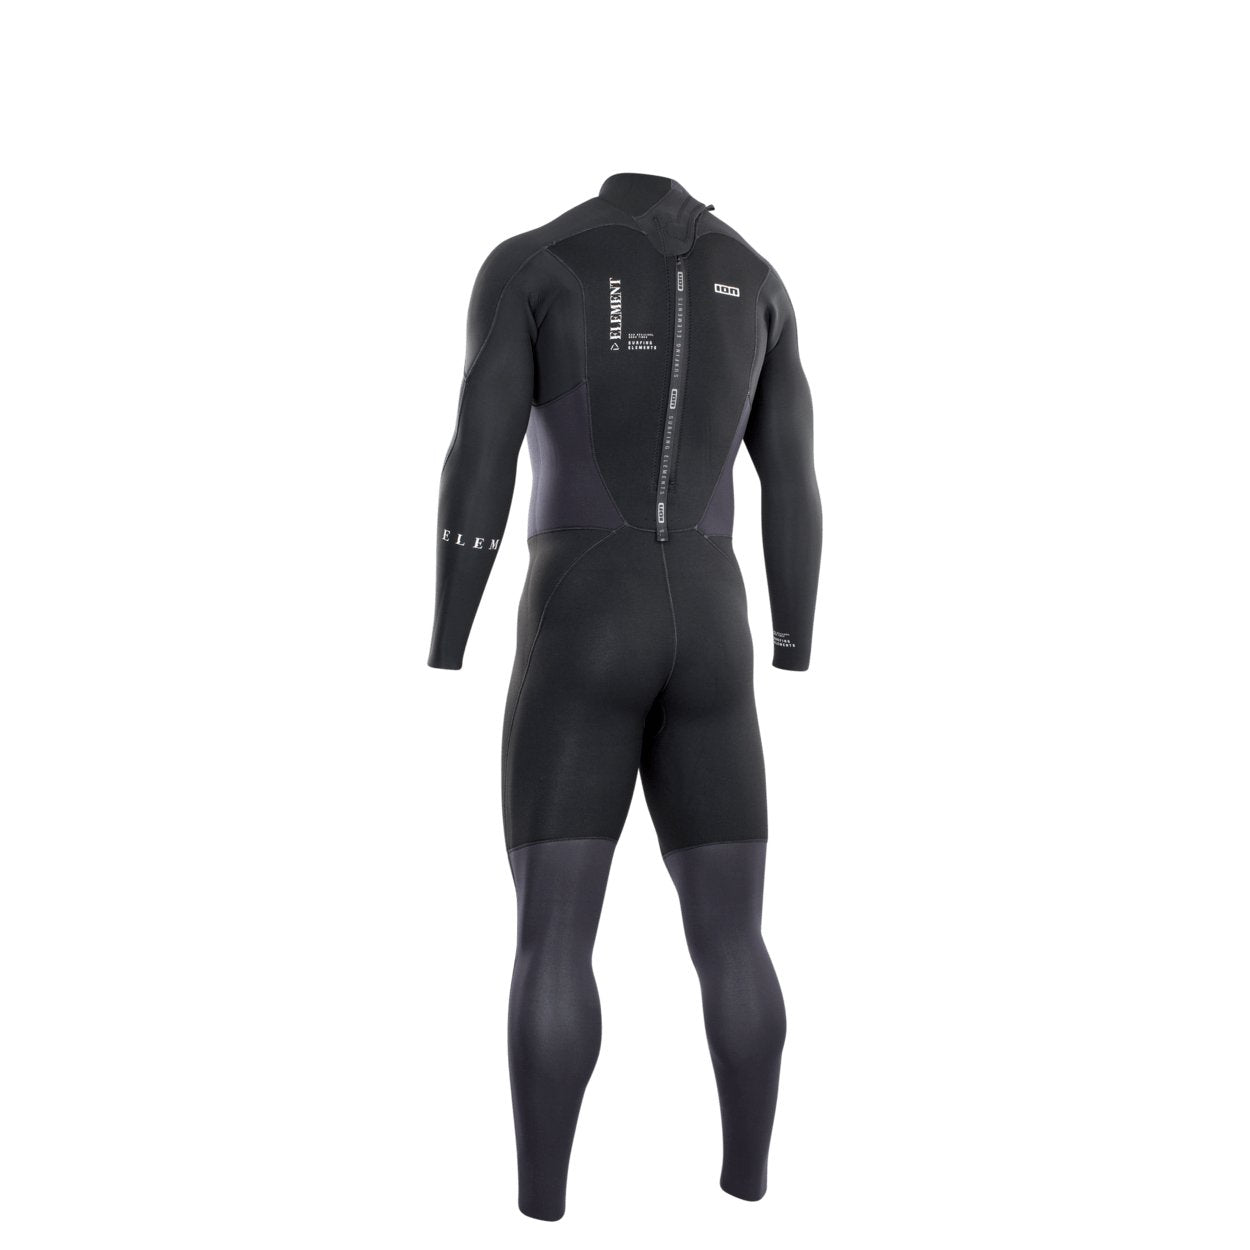 ION Men Wetsuit Element 4/3 Back Zip 2022 - Worthing Watersports - 9008415948468 - Wetsuits - ION Water